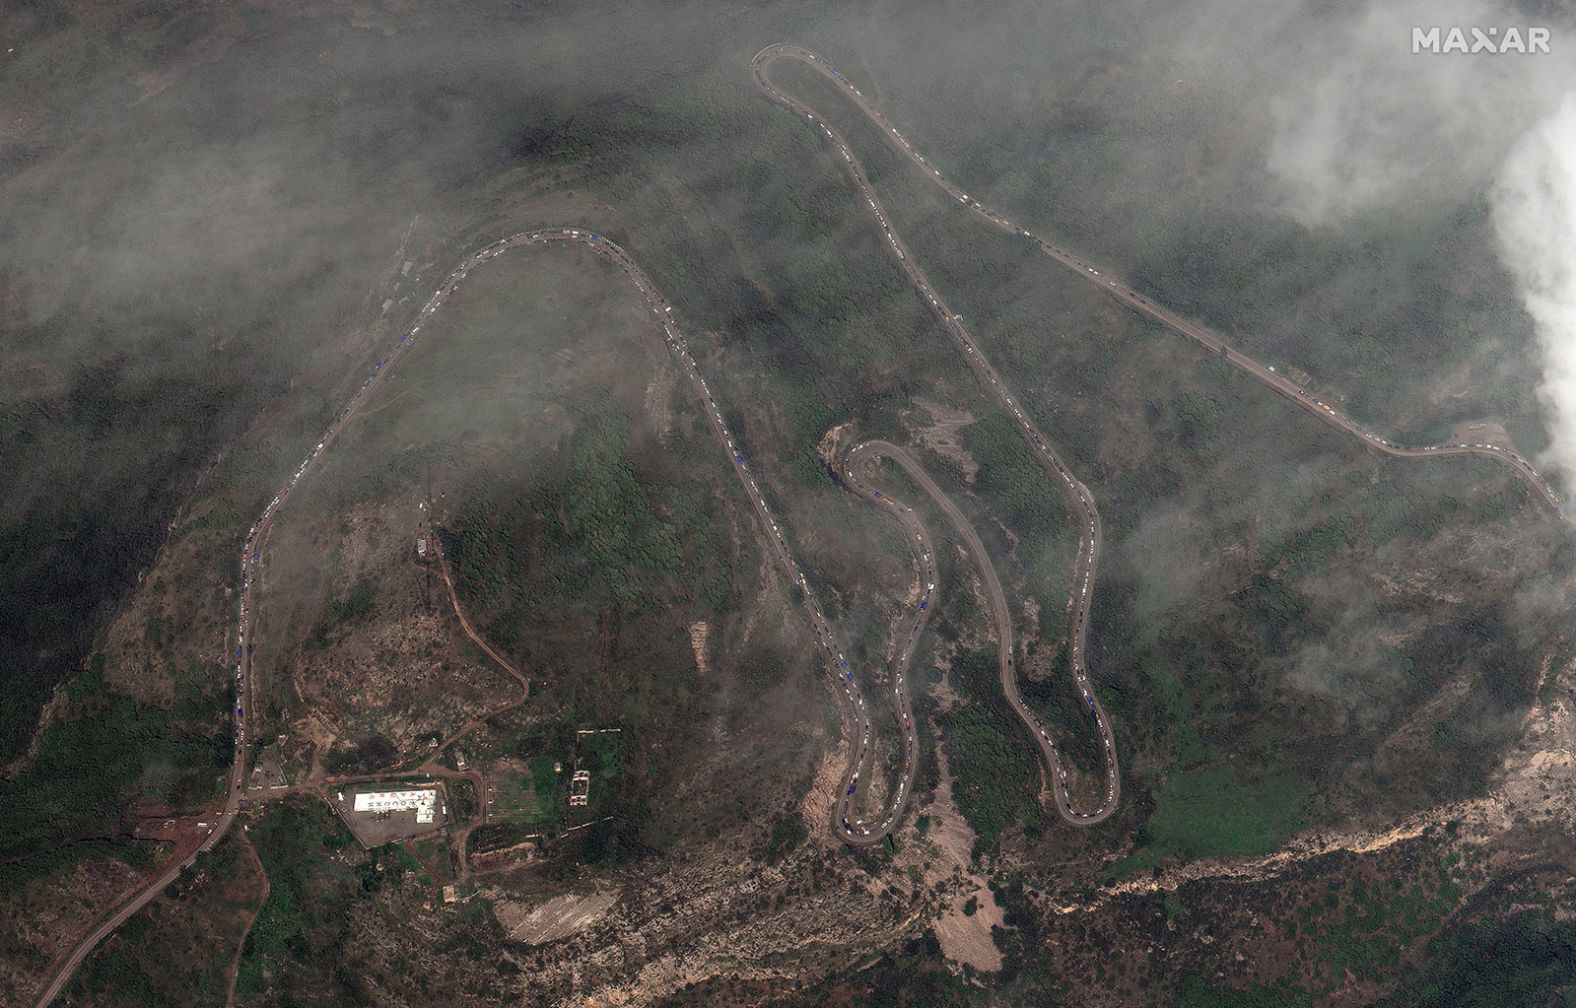 This satellite image shows a traffic jam  along the Lachin corridor as ethnic Armenians flee Nagorno-Karabakh on September 26. The Lachin corridor is the one road connecting the landlocked enclave to Armenia. The road was only recently opened to allow residents to flee.